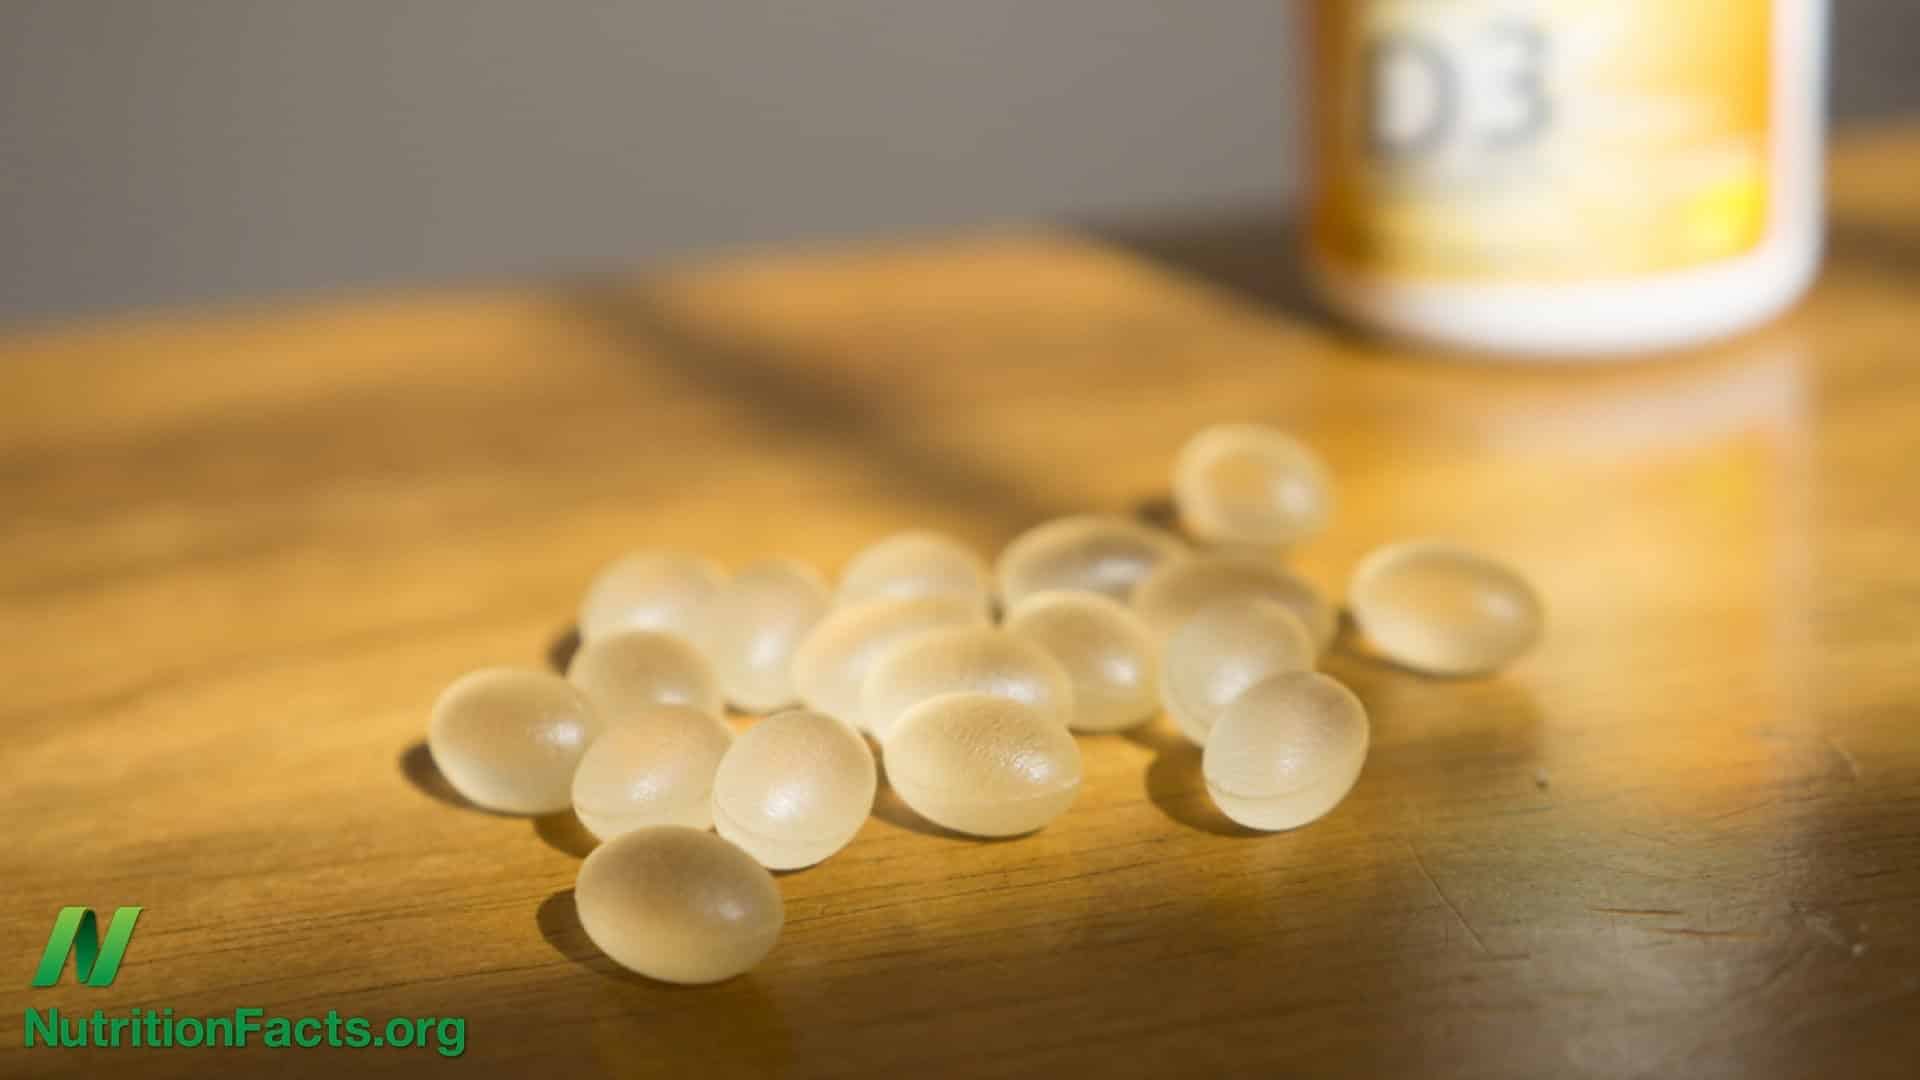 The Difficulty of Arriving at a Vitamin D Recommendation